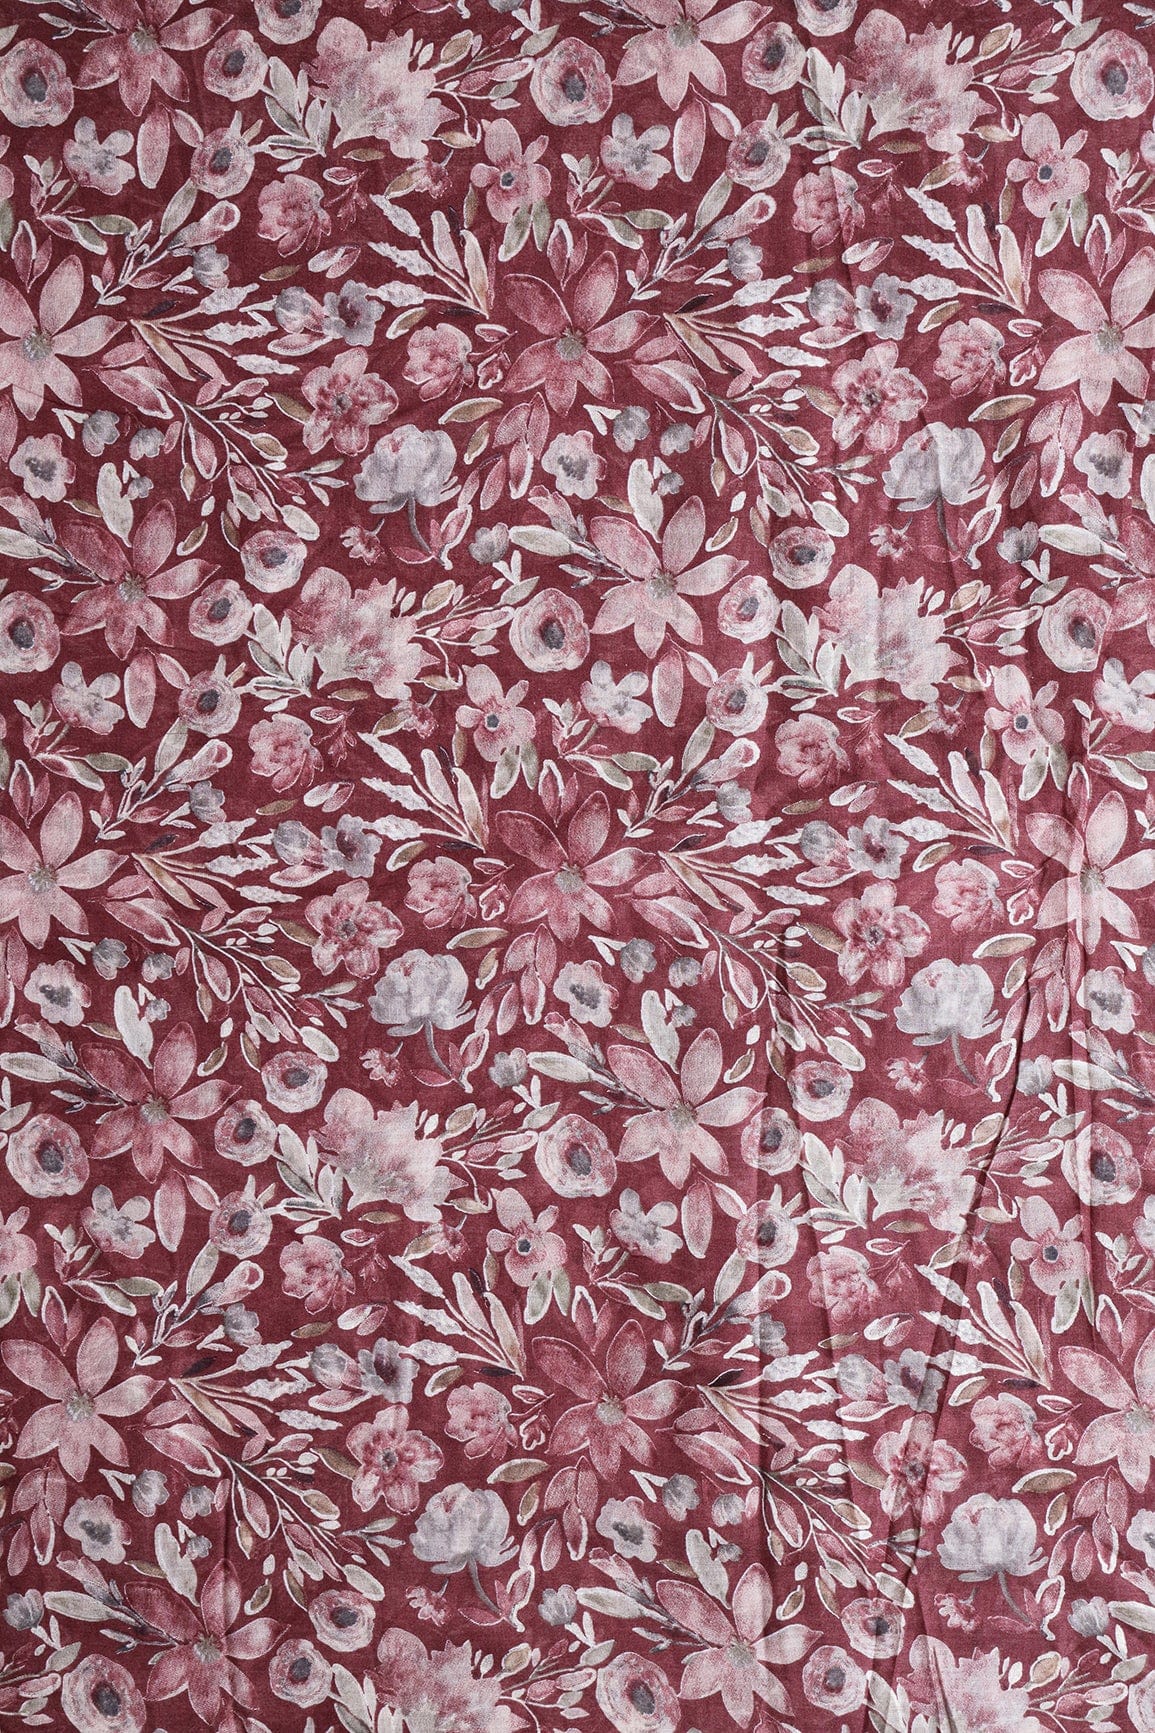 doeraa Prints Grey And Light Maroon Floral Foil Print On Maroon Pure Mul Cotton Fabric